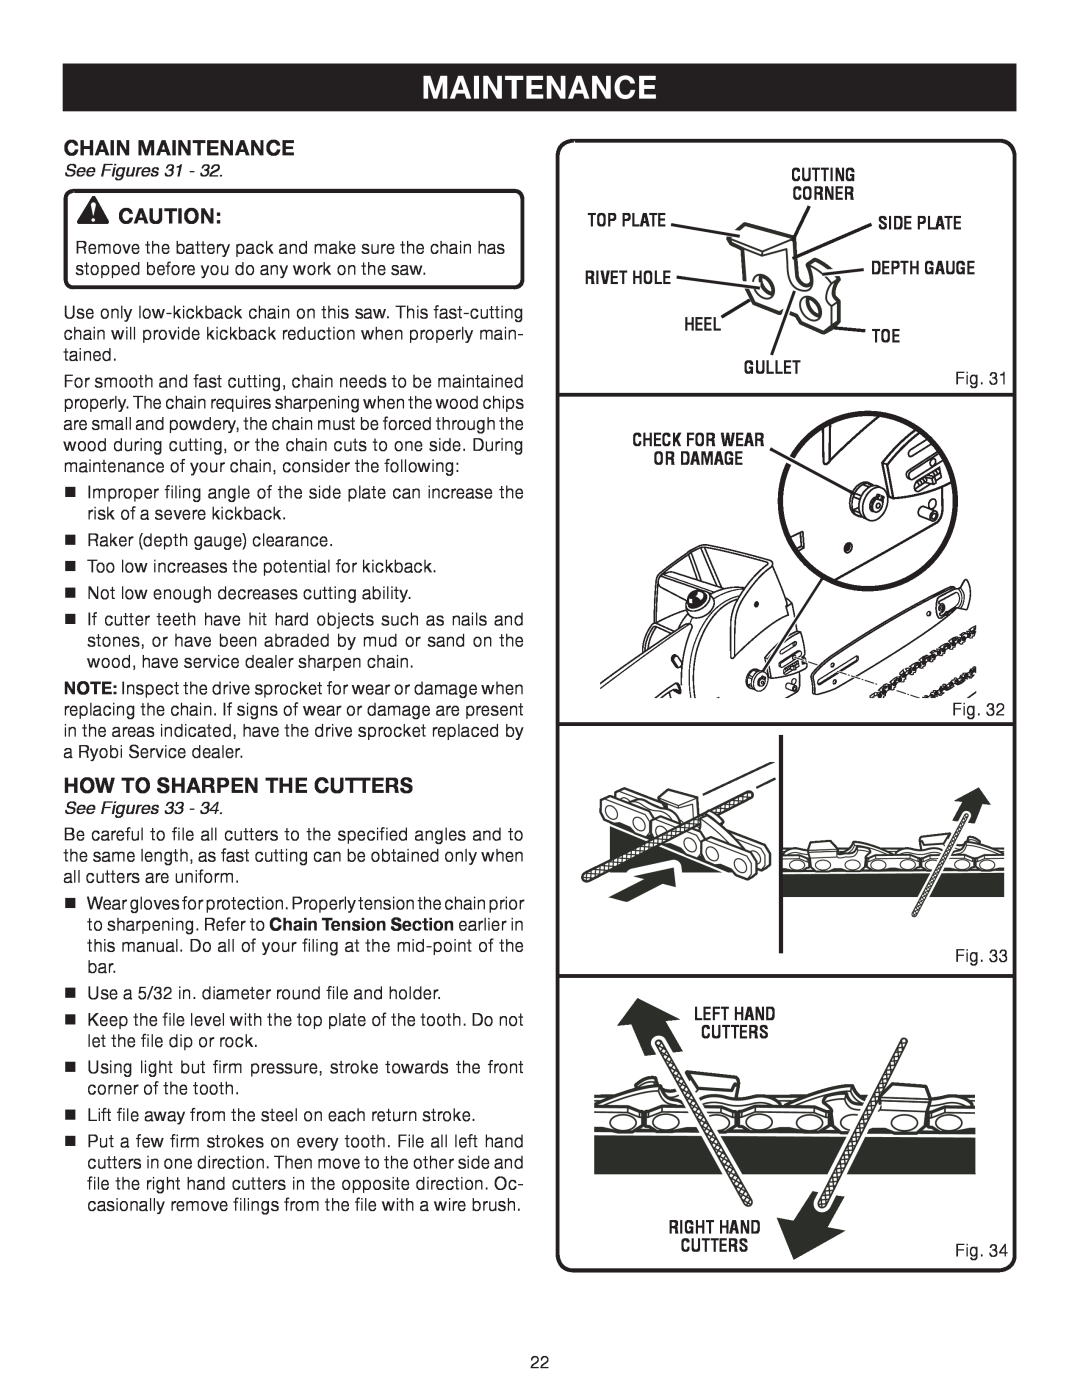 Ryobi P540B manual Chain Maintenance, How to Sharpen the Cutters, See Figures 